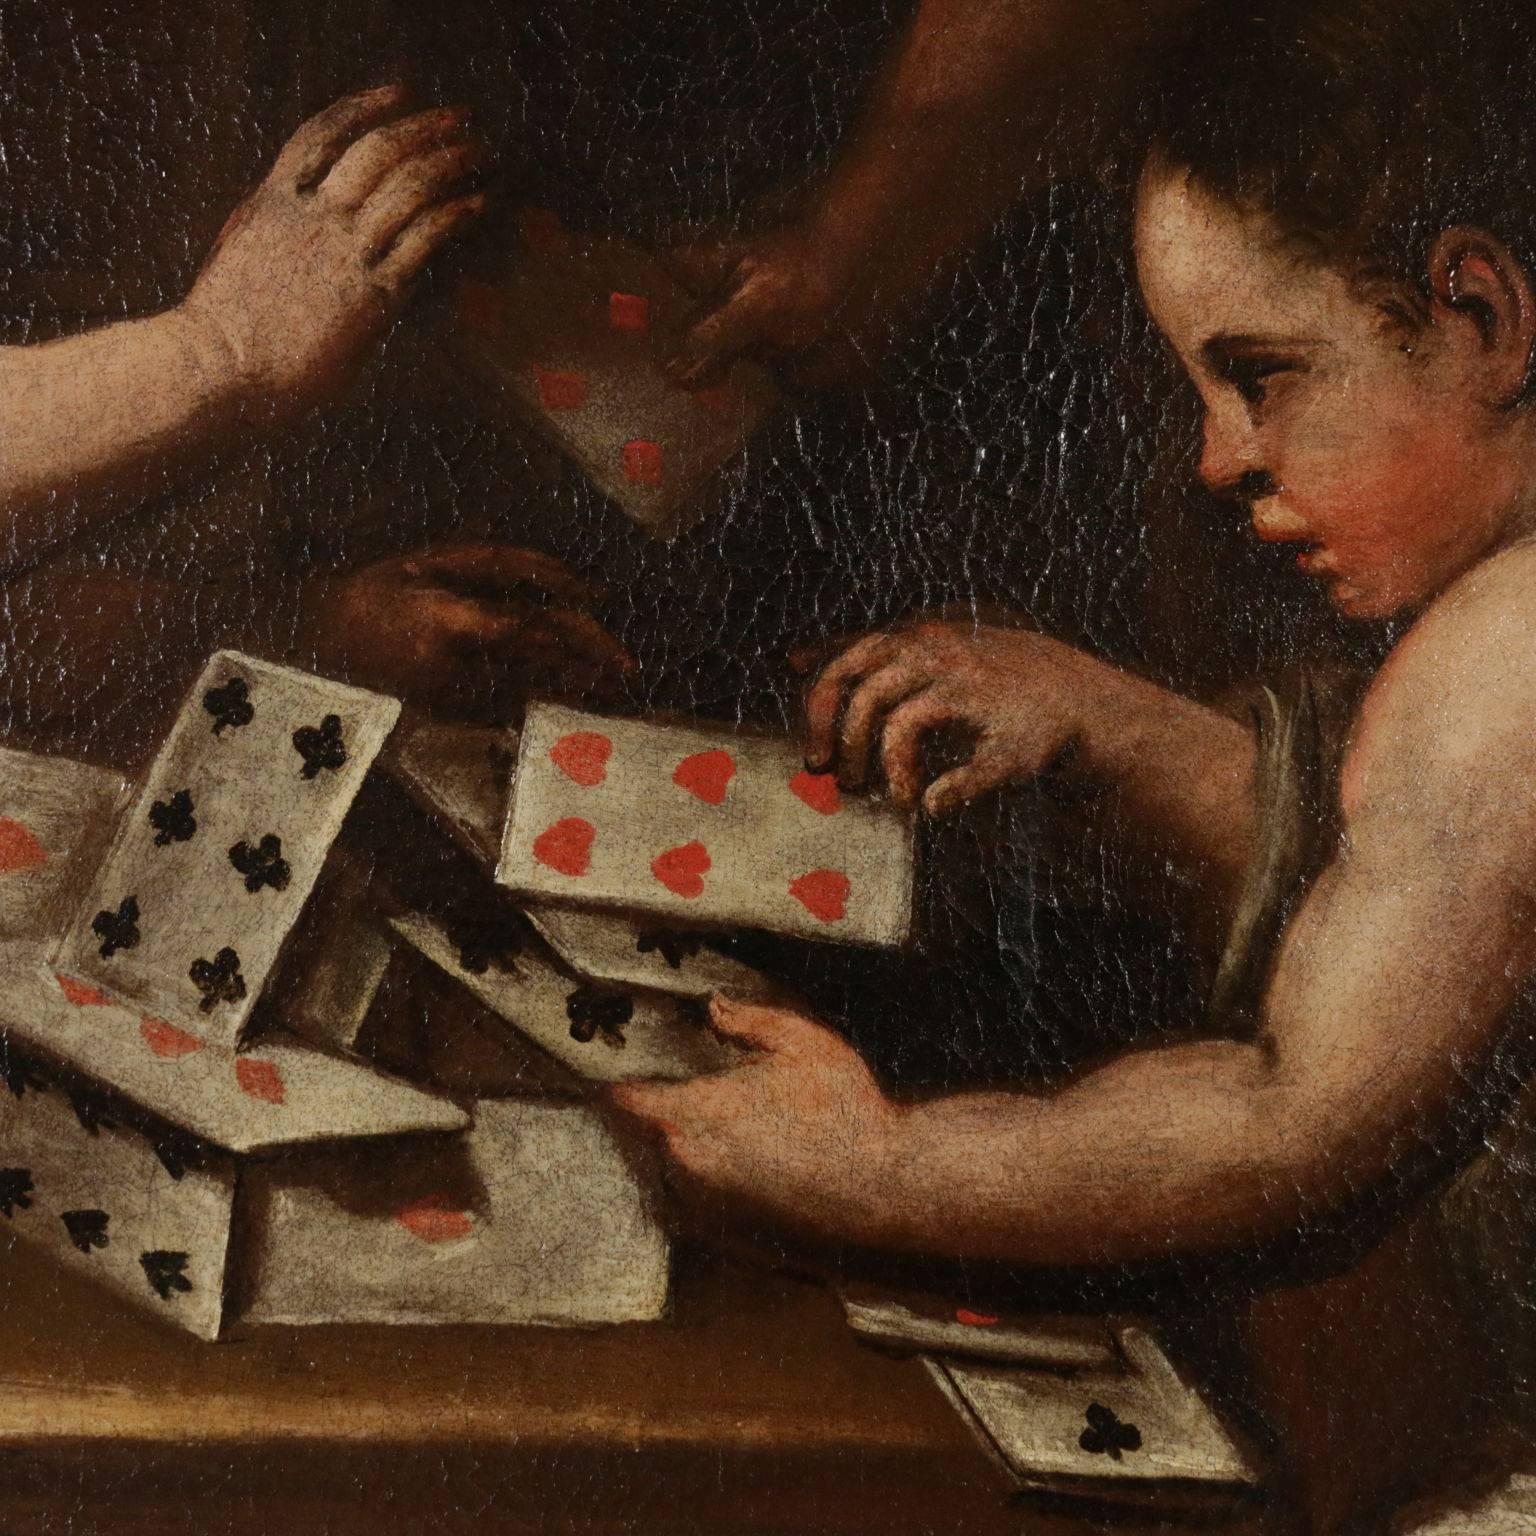 Oil on canvas. The depicted scene is set in a closed environment with a wide window which provides a glimpse of landscape. Three cherubs are sitting on benches and they are playing with cards, trying to build a castle. The painting has been